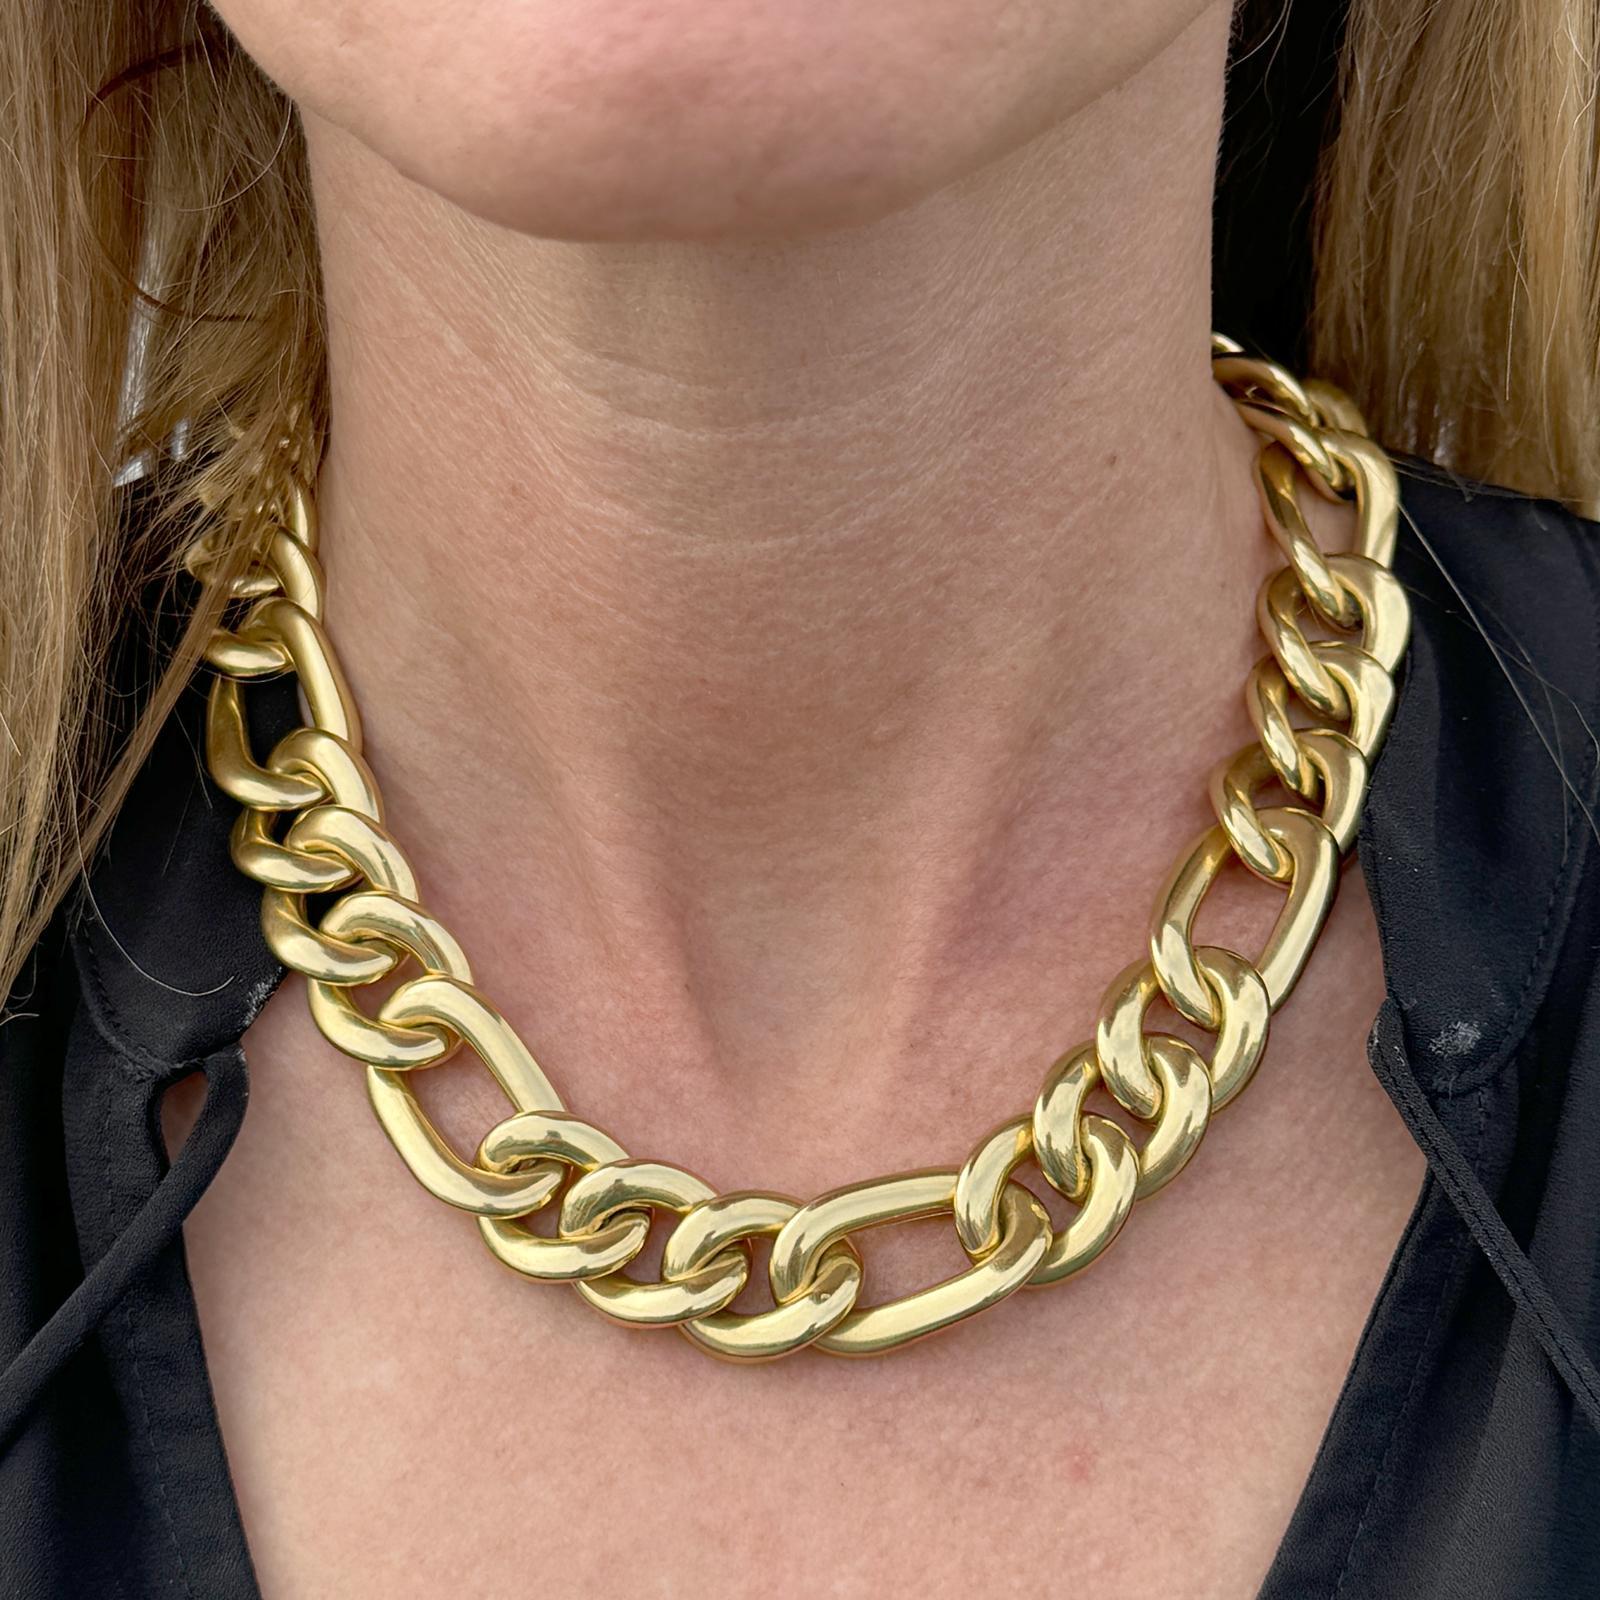 Heavy Italian figaro link necklace crafted in 18 karat yellow gold. The necklace measures 17 inches in length, approximately 18mm in width, and features a large lobster clasp. Weight: 99.5 grams.